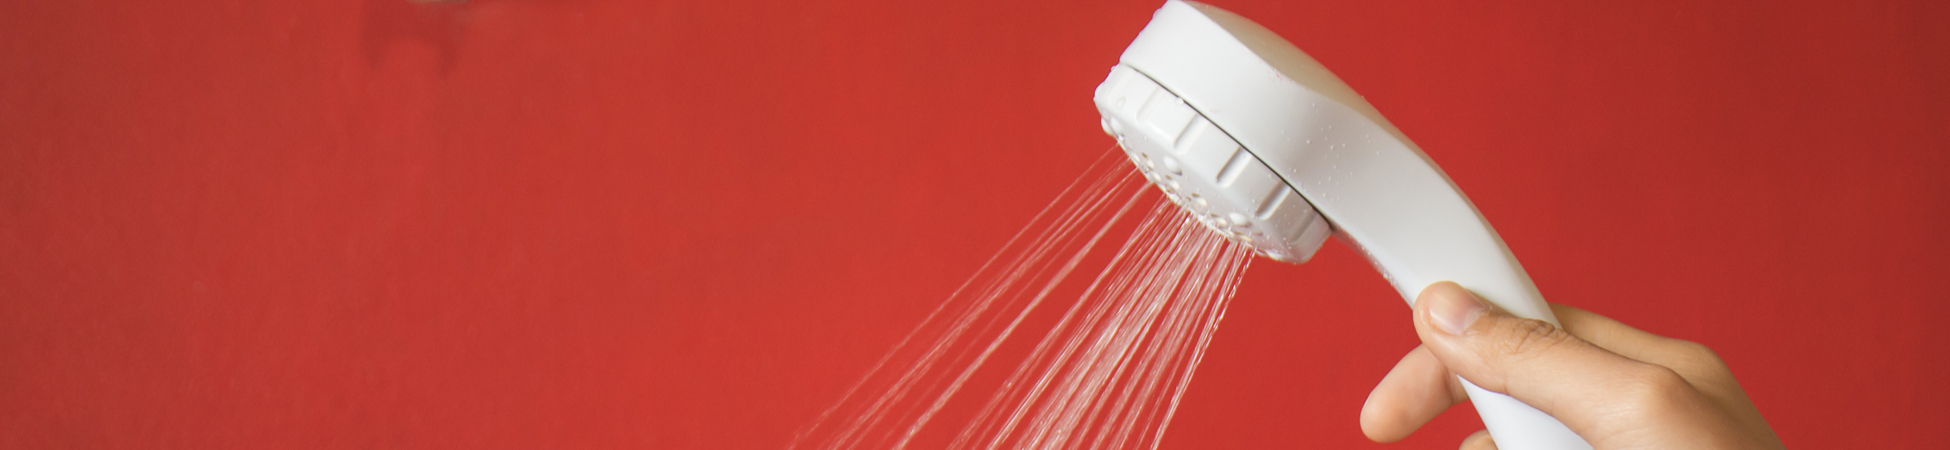 8 Signs Your Water Heater is Dying (& What to Do About It)